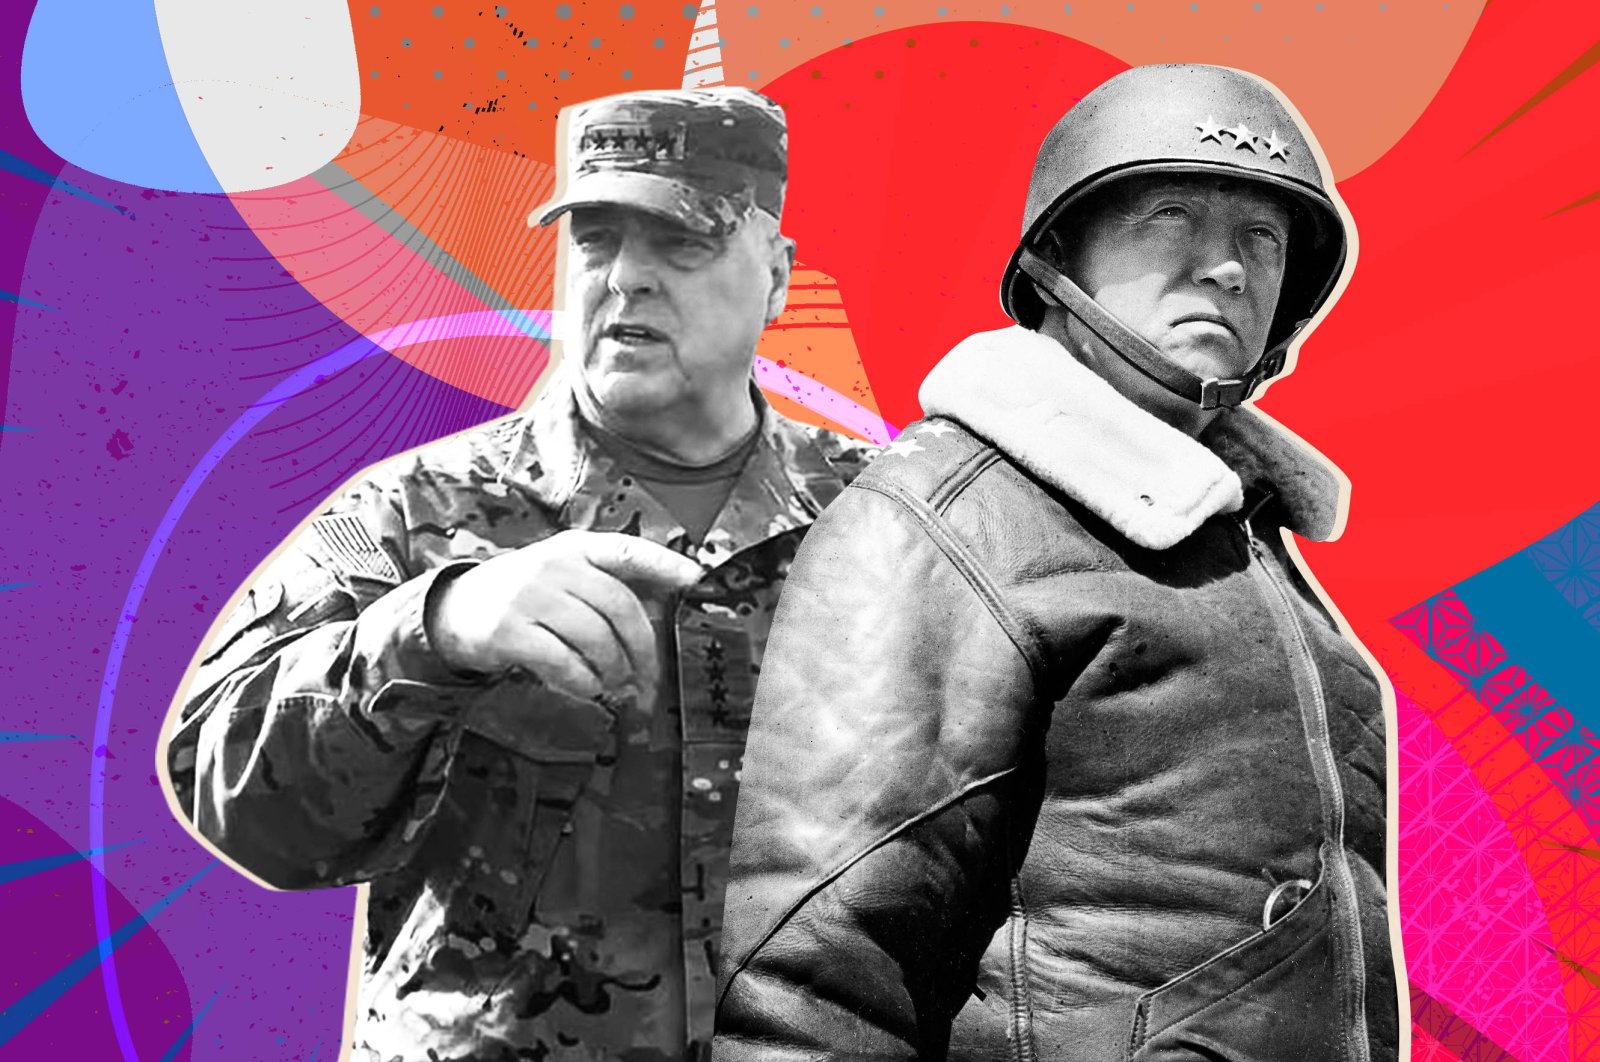 The illustration shows U.S. Joint Chiefs of Staff General Mark Milley (L) and George Smith Patton Jr., a general in the U.S. Army who commanded the Seventh United States Army in the World War II. (Illustration by Büşra Öztürk)